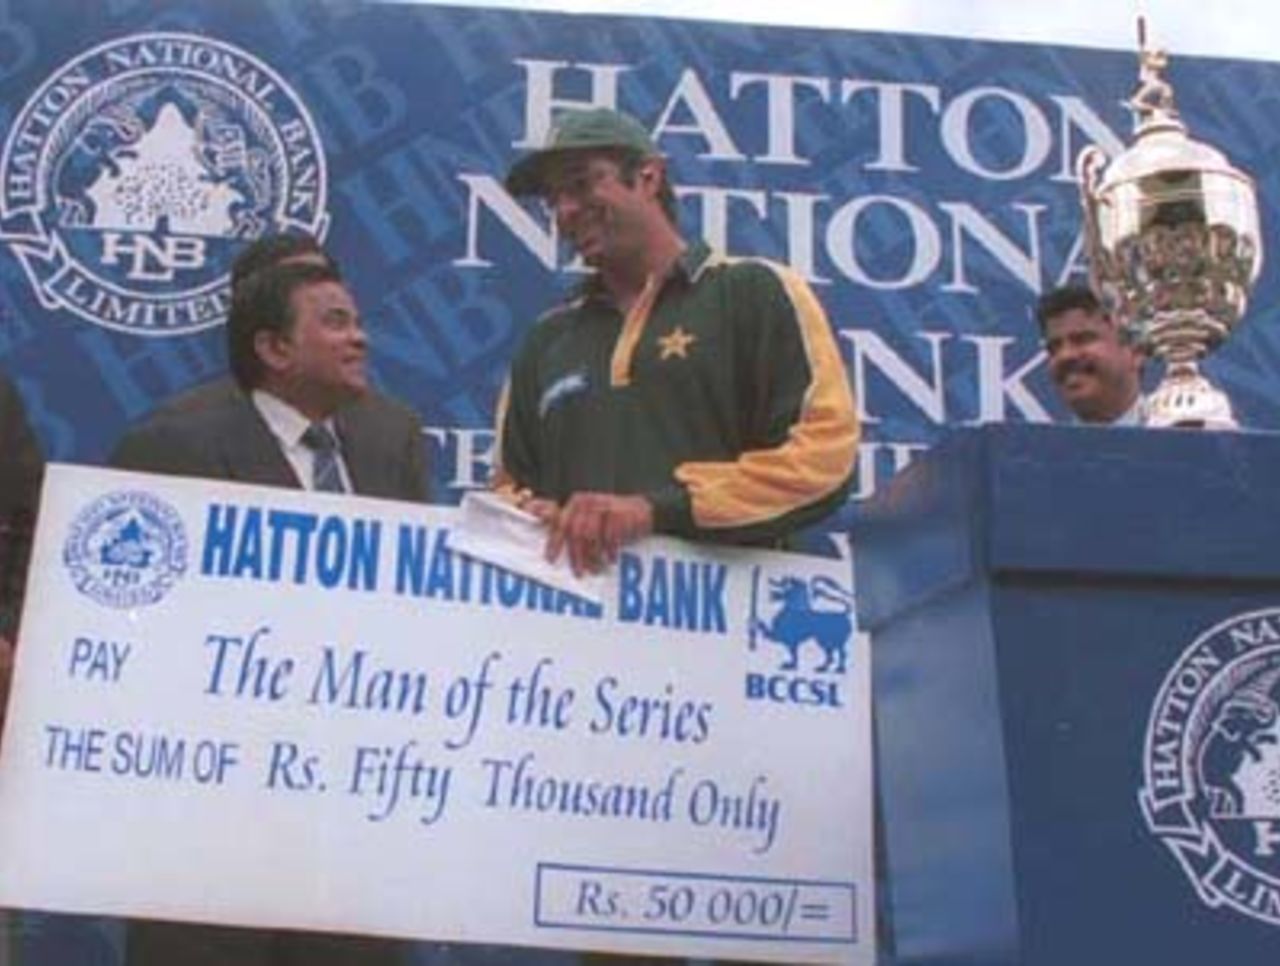 Wasim Akram receives the Man of the Series award during the fifth day of the third and final cricket Test between Sri Lanka and Pakistan in Asgiriya International cricket stadium in Kandy, Sri Lanka on Saturday, July.1, 2000